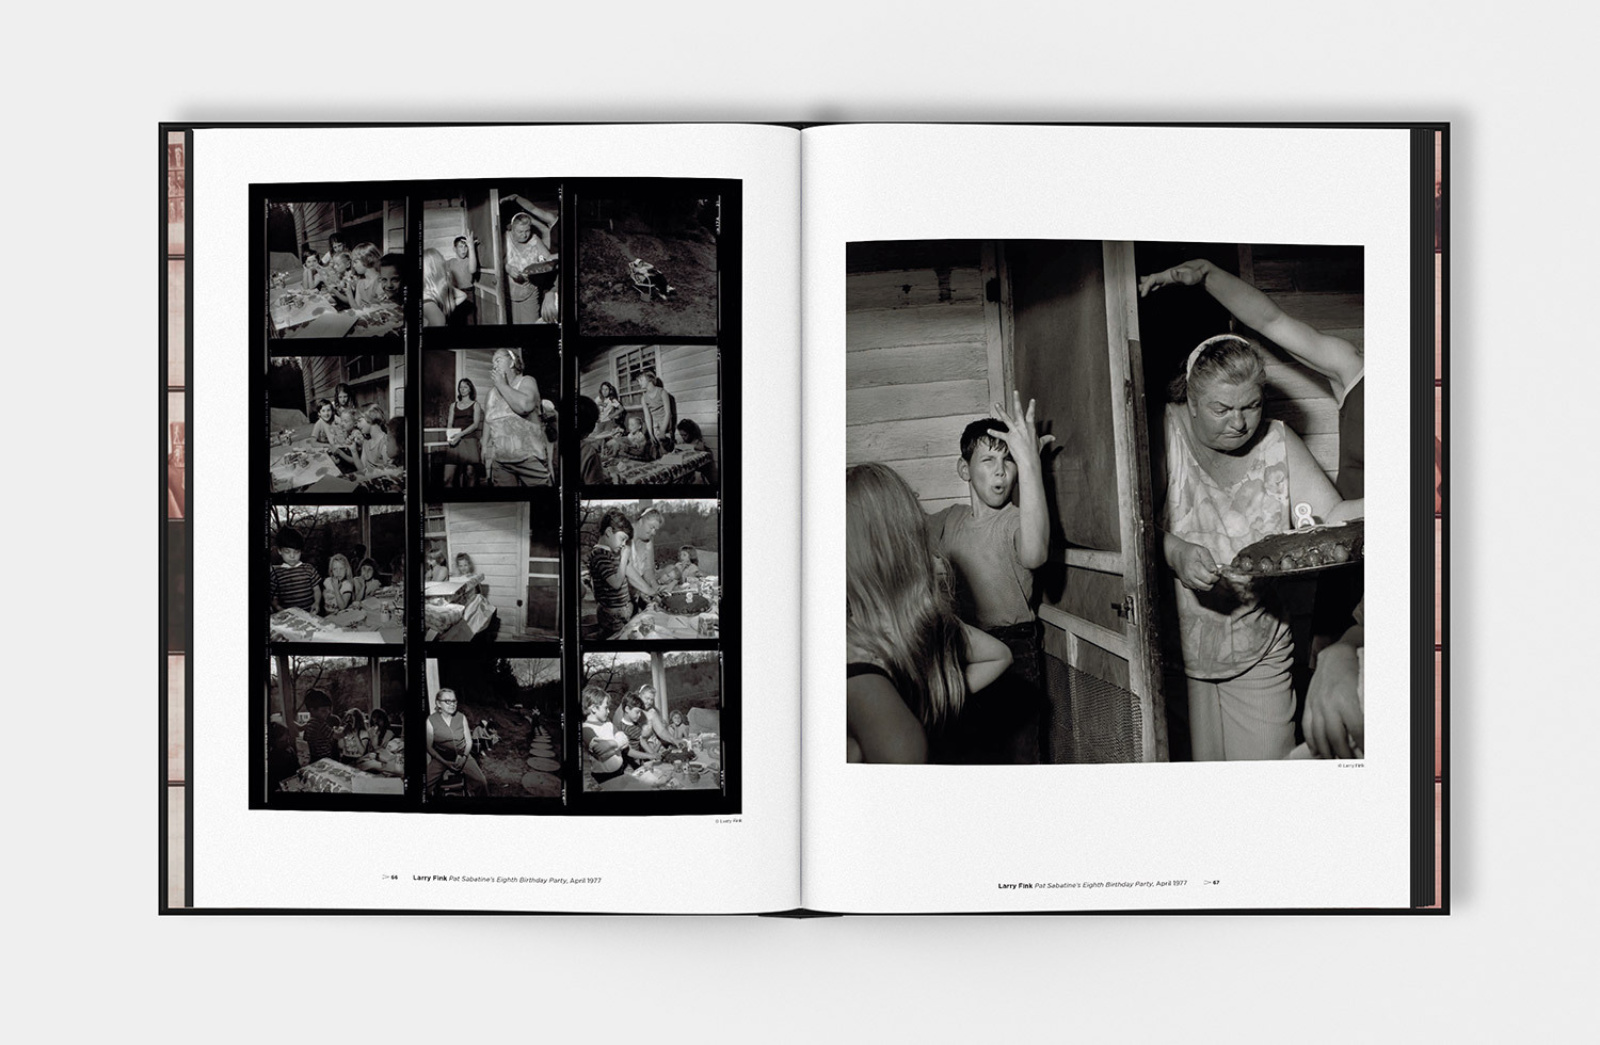 PROOF book design spread, showing a contact sheet and the chosen frame, photographed by Larry Fink